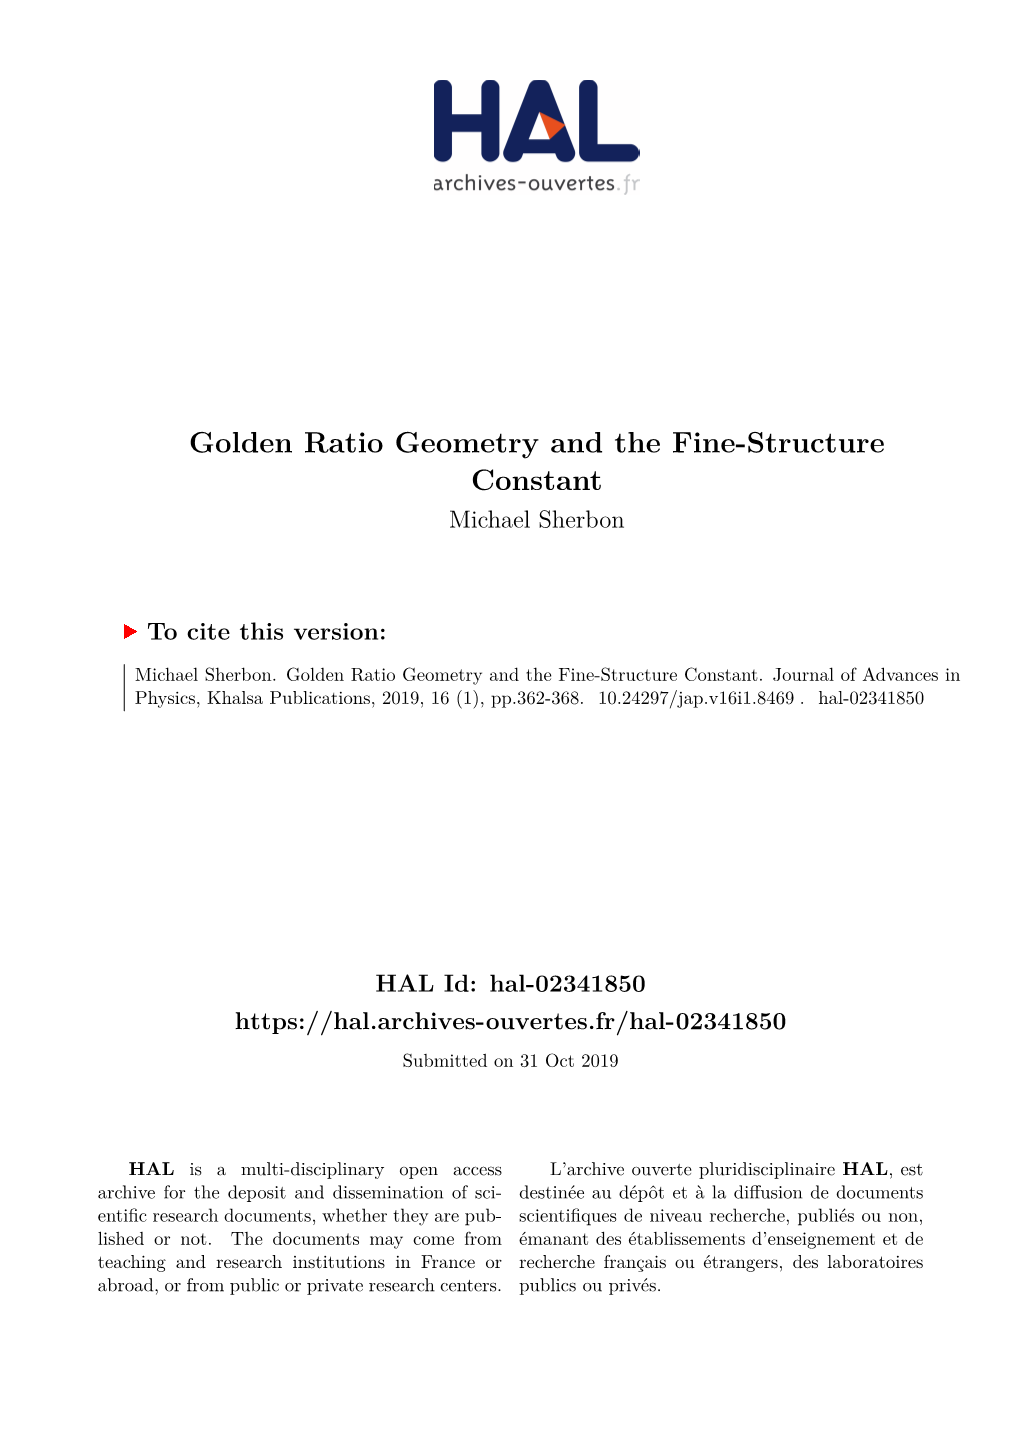 Golden Ratio Geometry and the Fine-Structure Constant Michael Sherbon